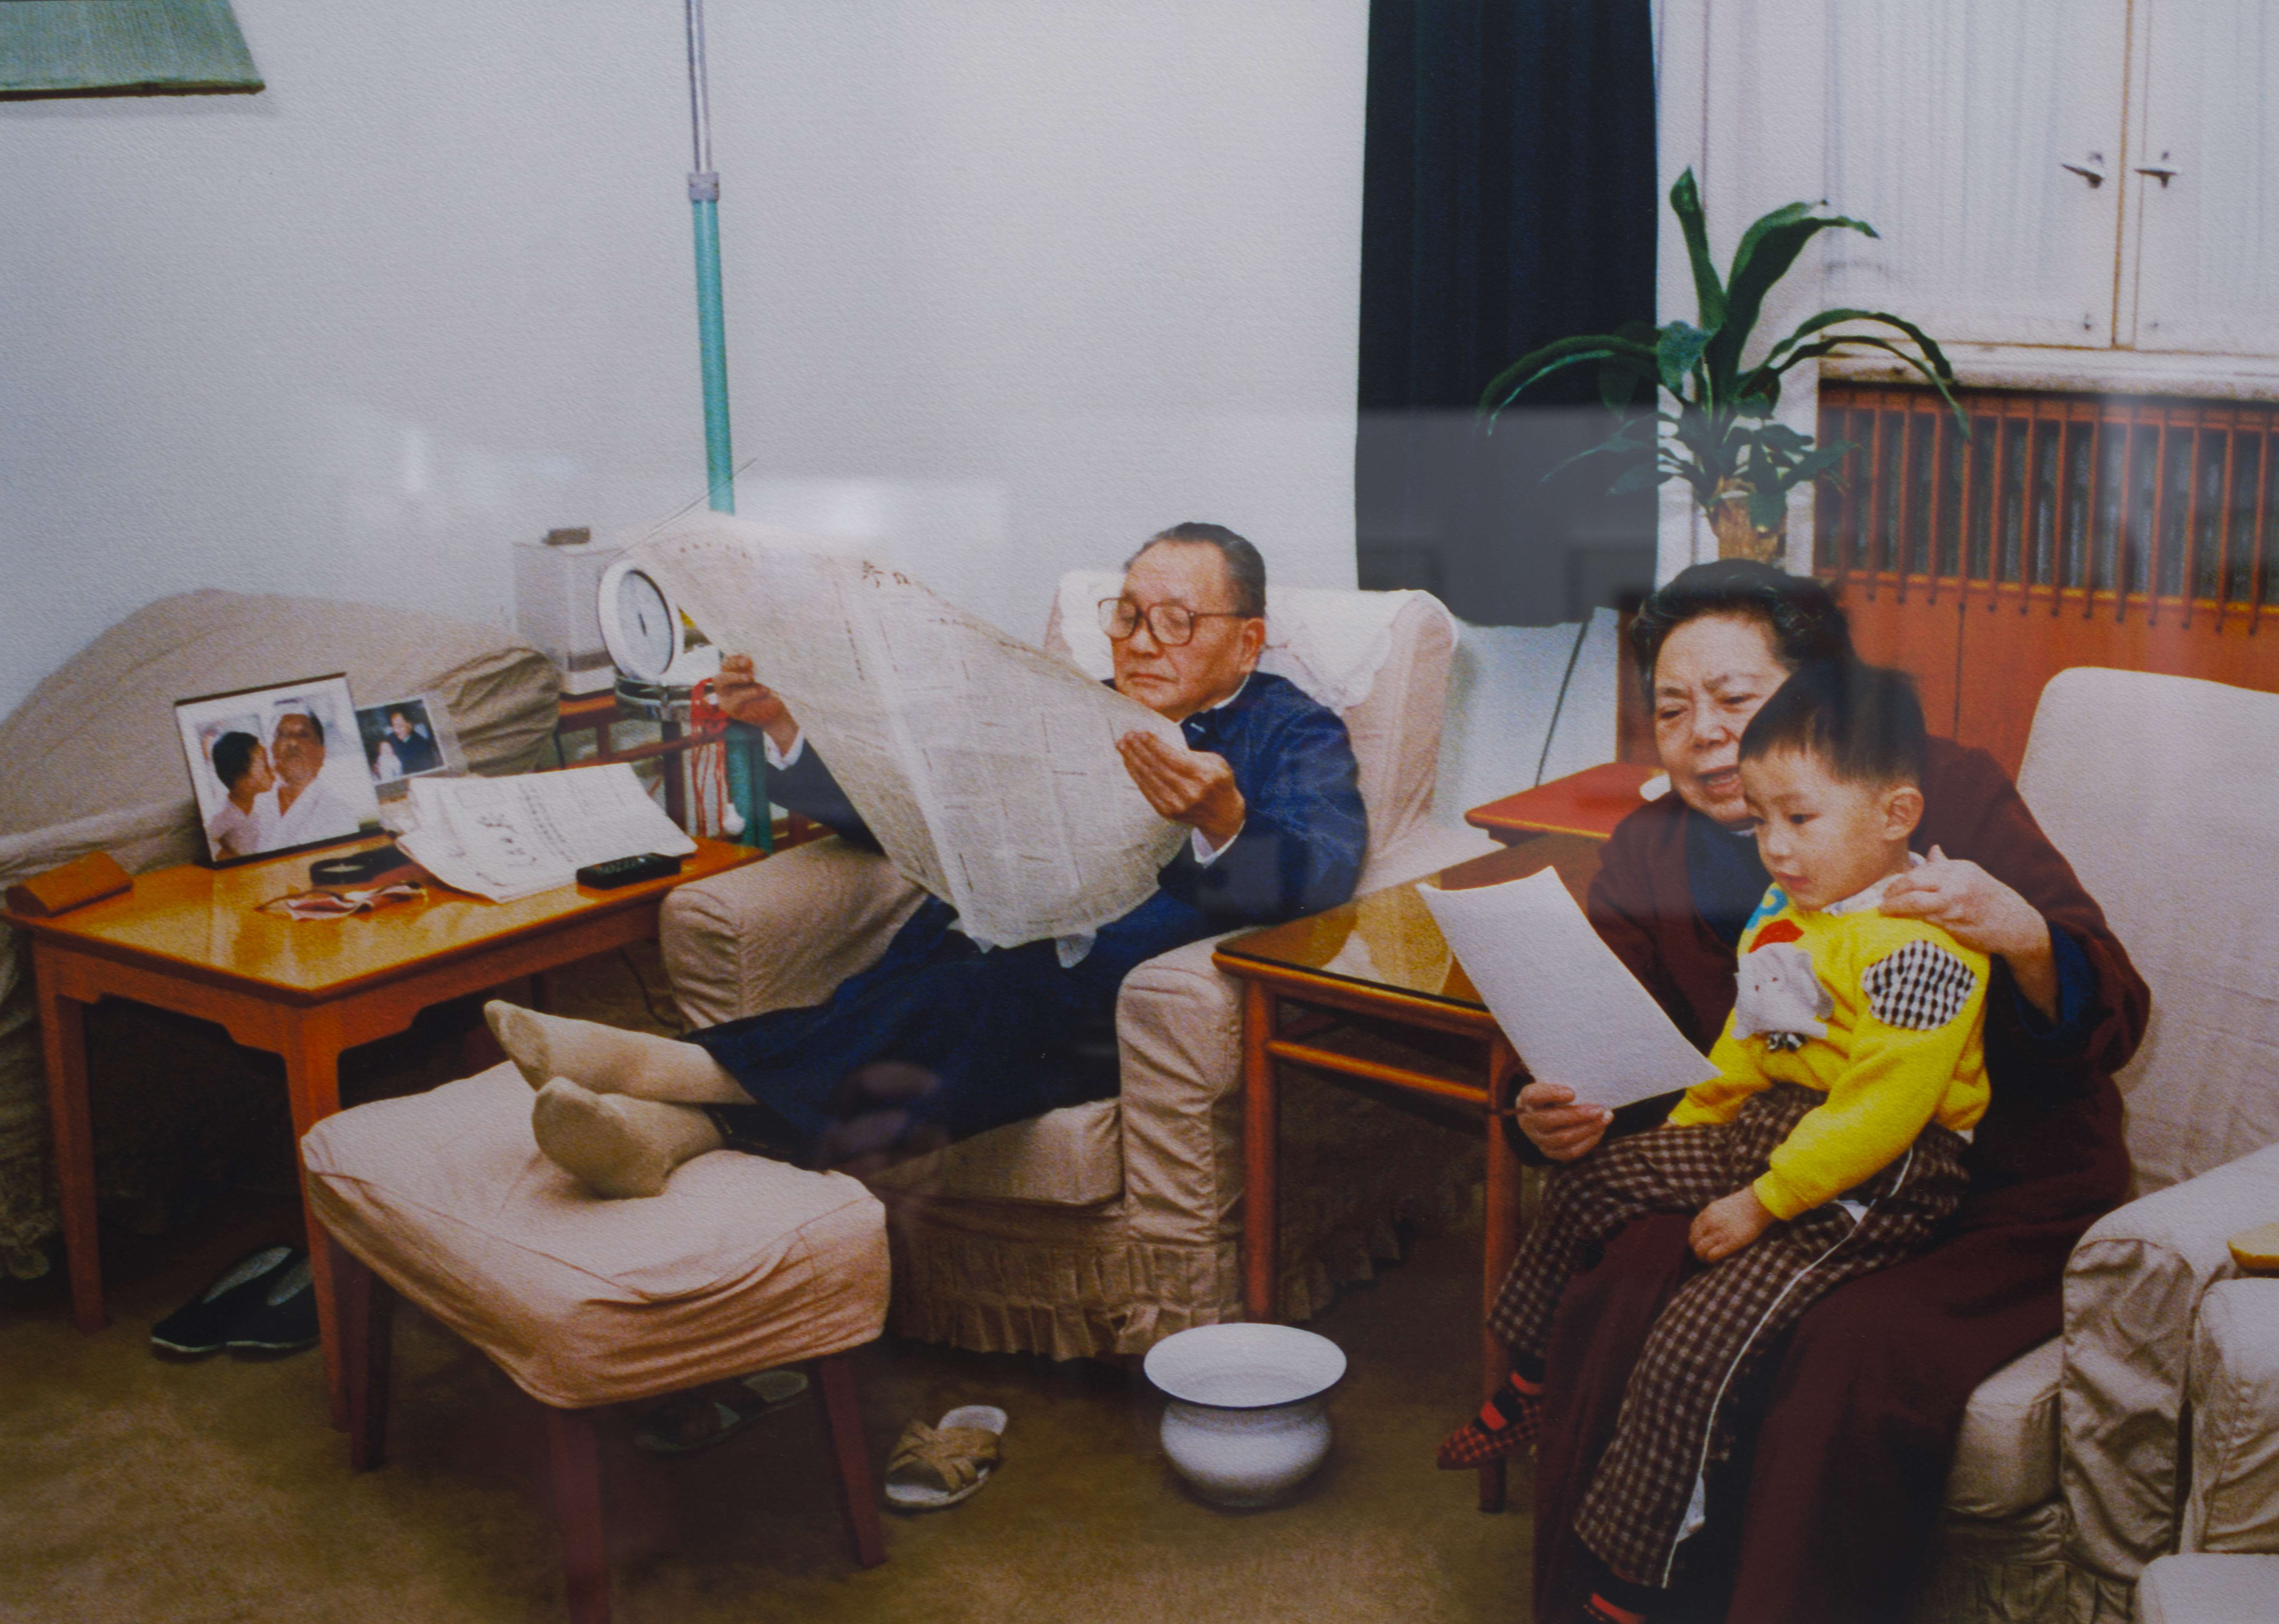 “The Retirement Life of Xiaoping” (1988), by Yang Shaoming, is part of the Hong Kong International Photo Festival’s highlight exhibition, “1,000 Families”. 